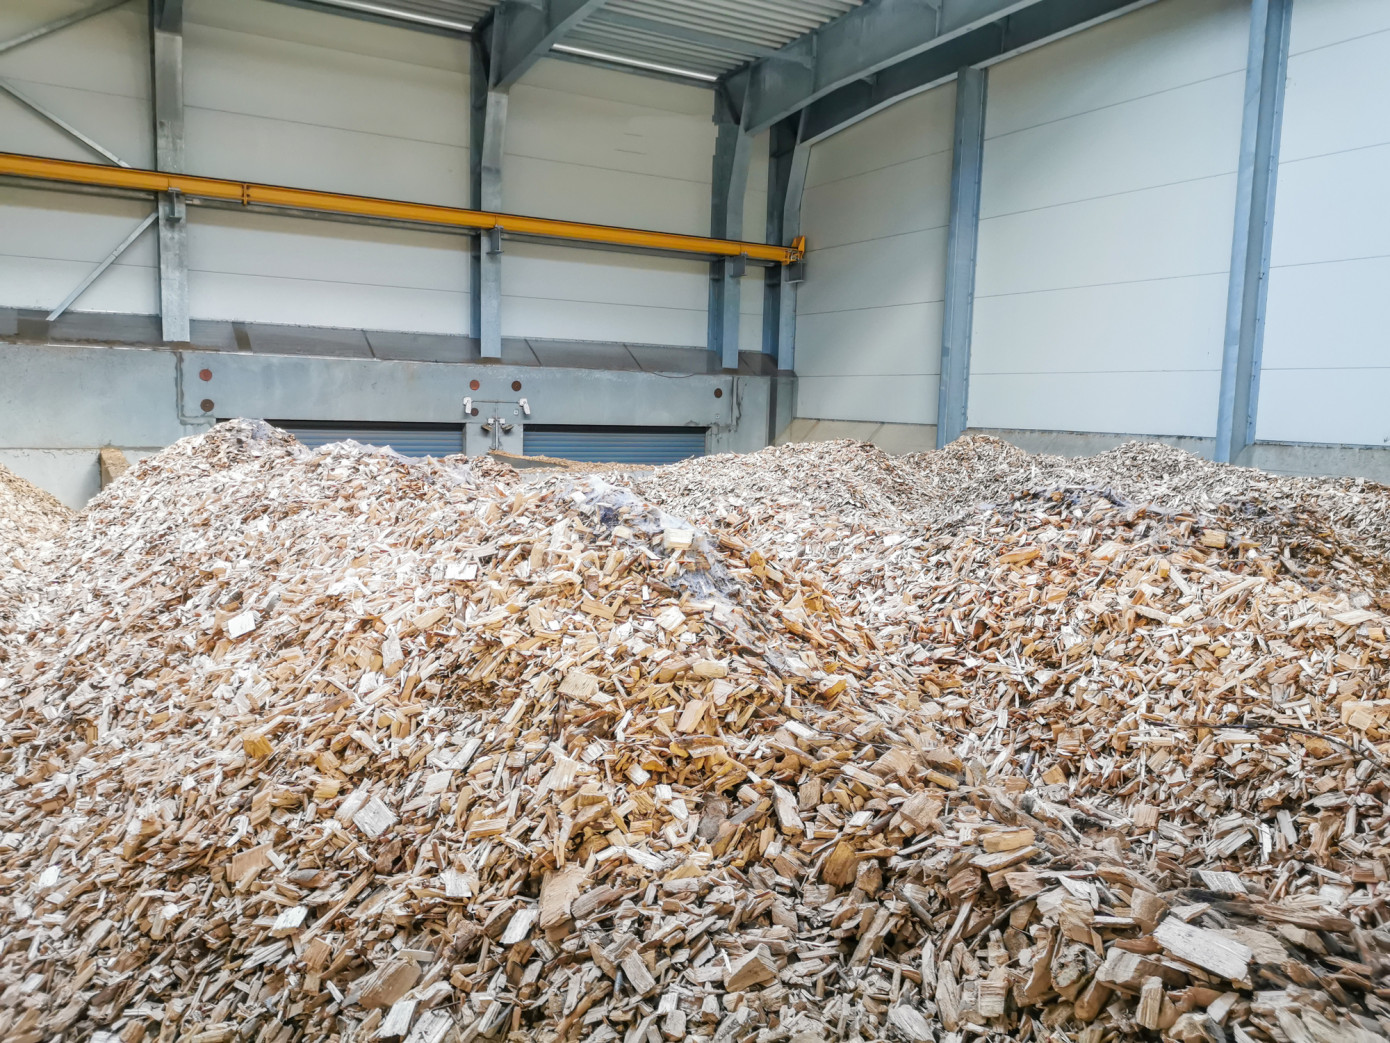 Finland"s wood fuels consumption decreased by 2% in 2023